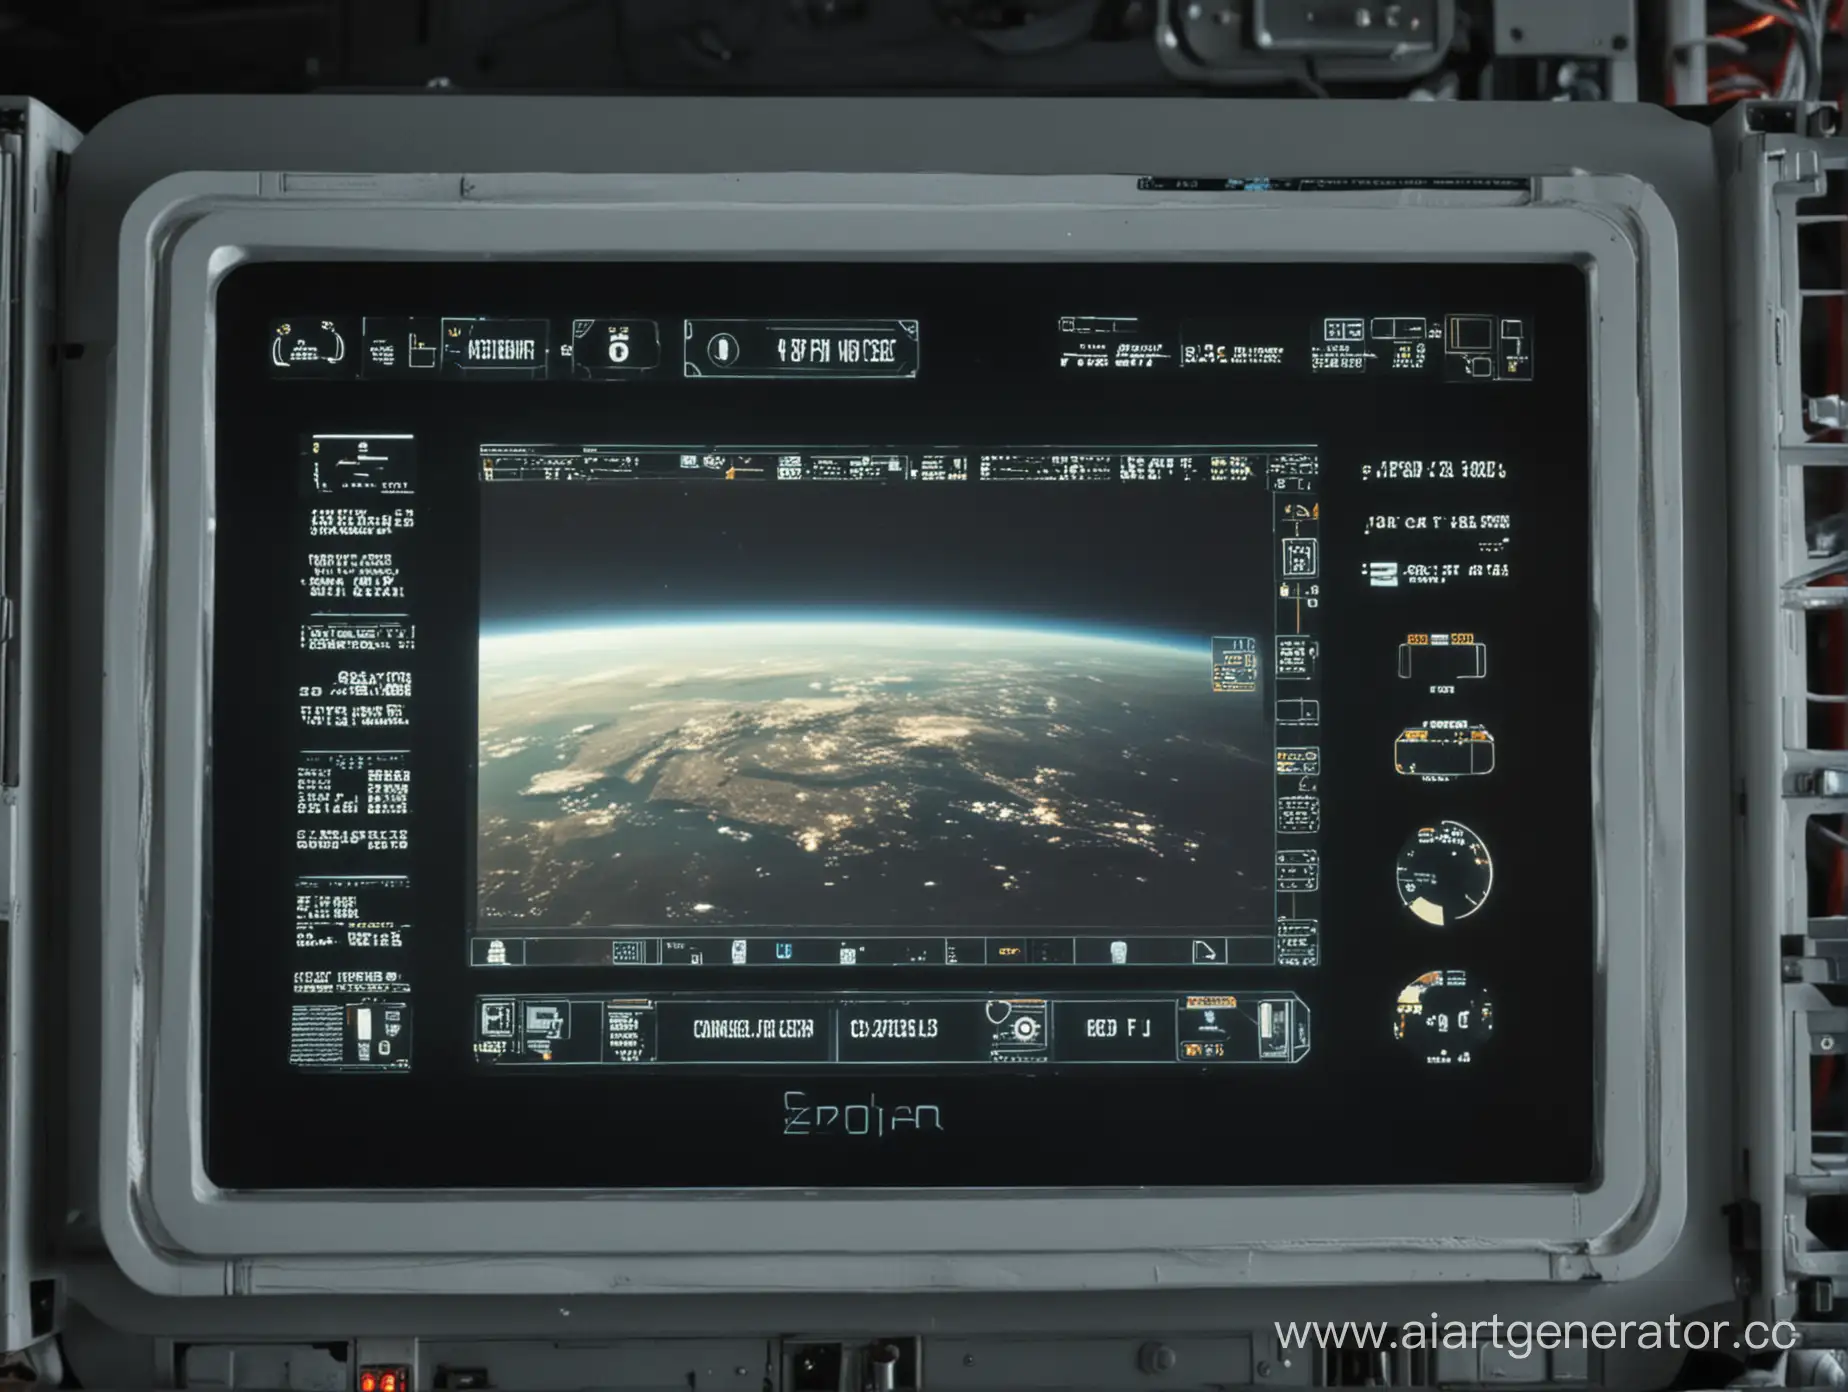 The monitor screen on the spaceship